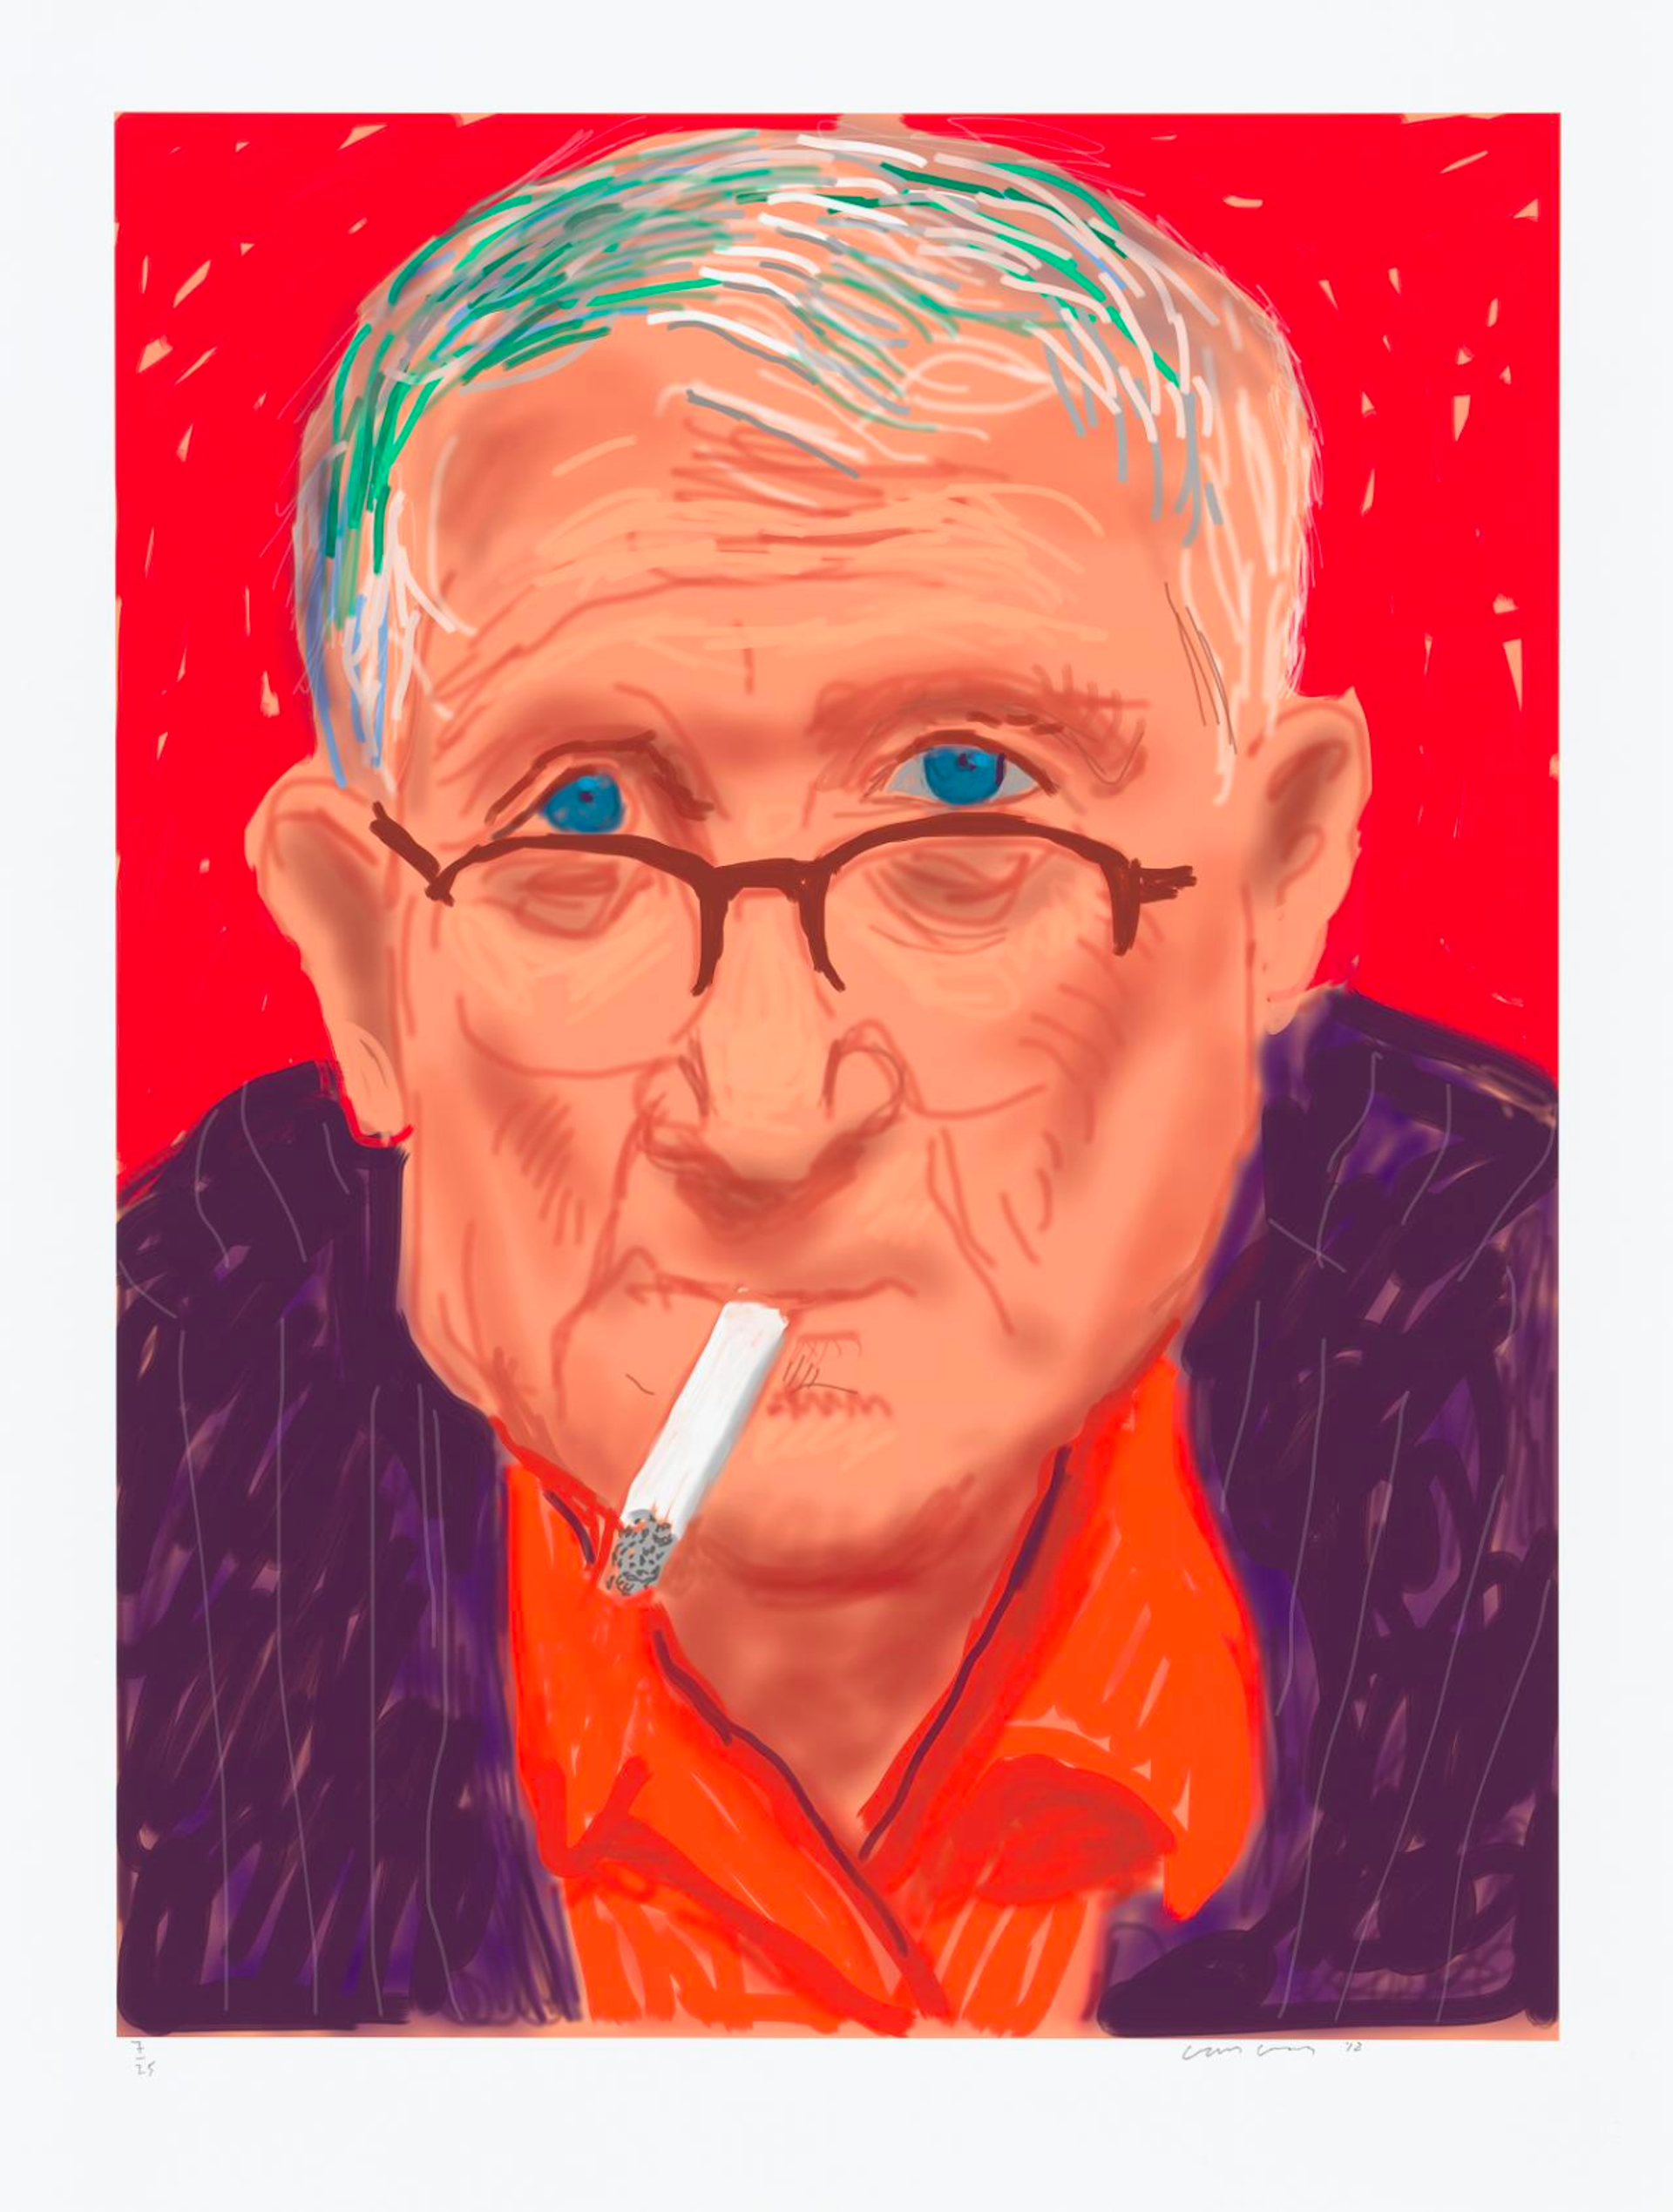 A self-portrait of David Hockney. He wears brown half-rimmed glasses, a purple jacket, orange shirt, and has a cigarette in his mouth. iPad drawing.